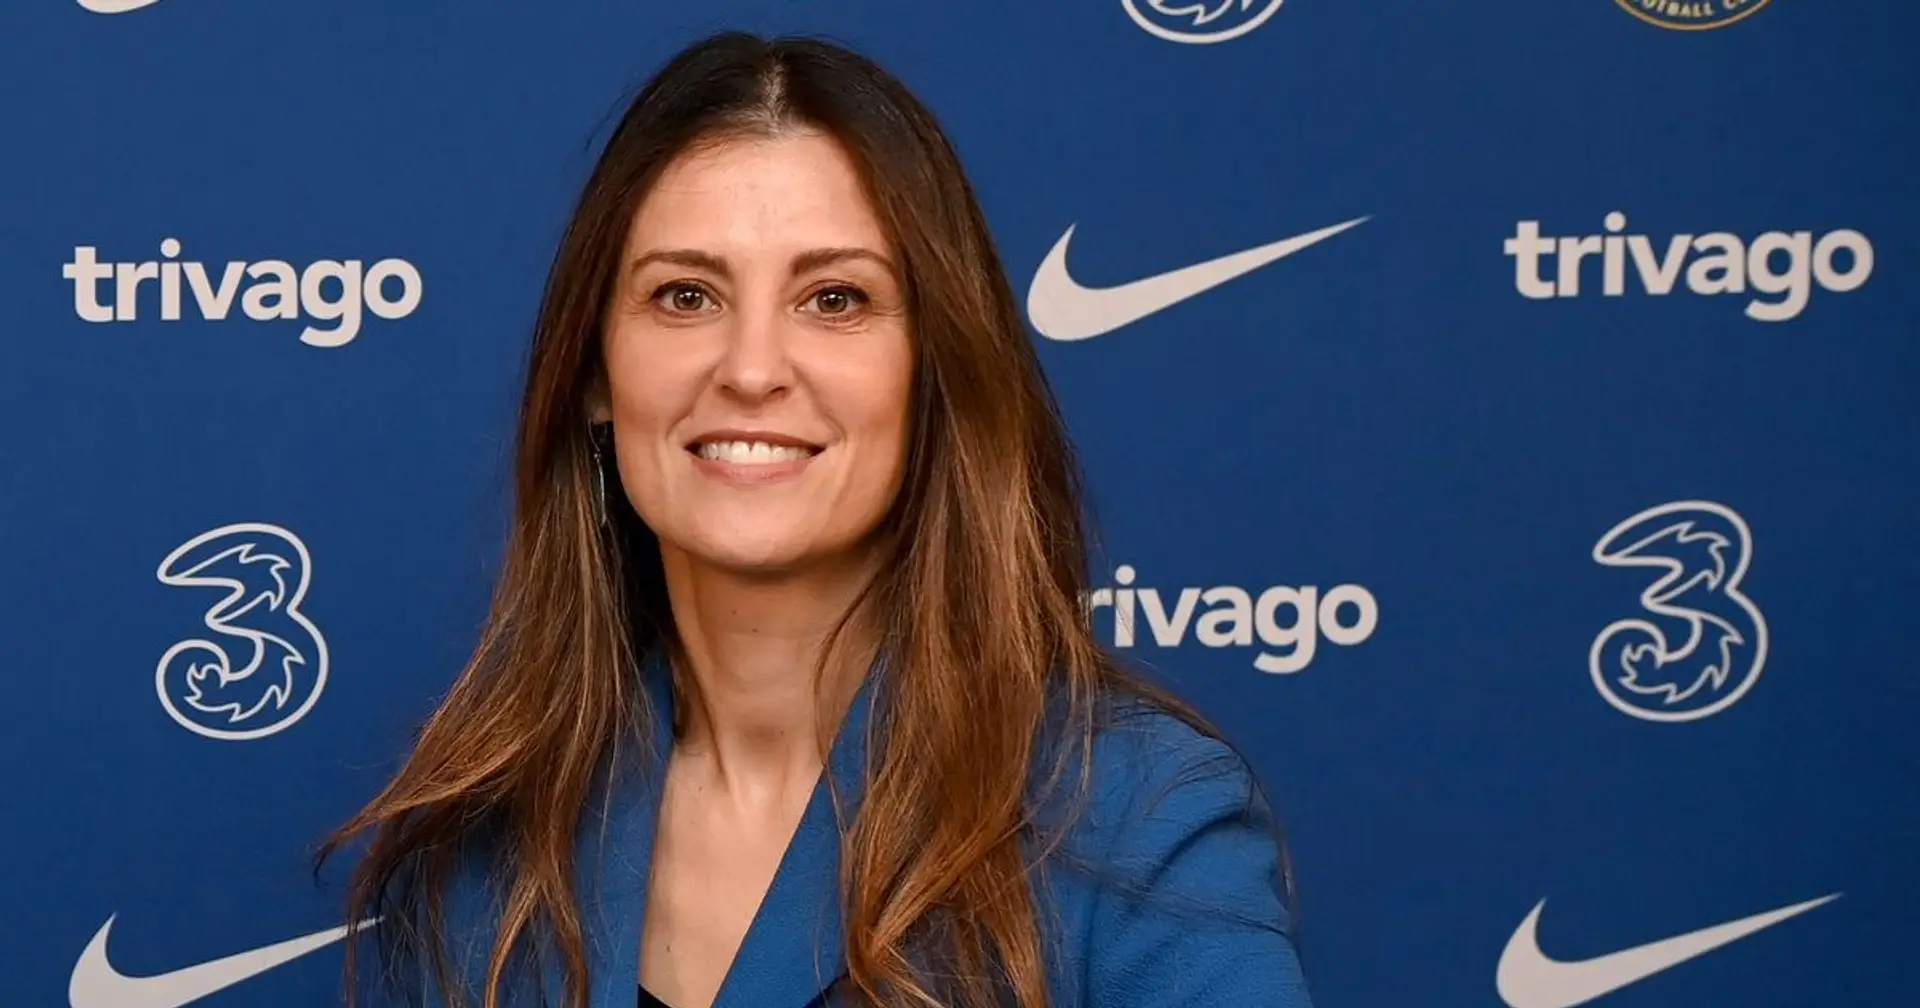 Marina Granovskaia benefitted from Abramovich secret payments investigated by Premier League 